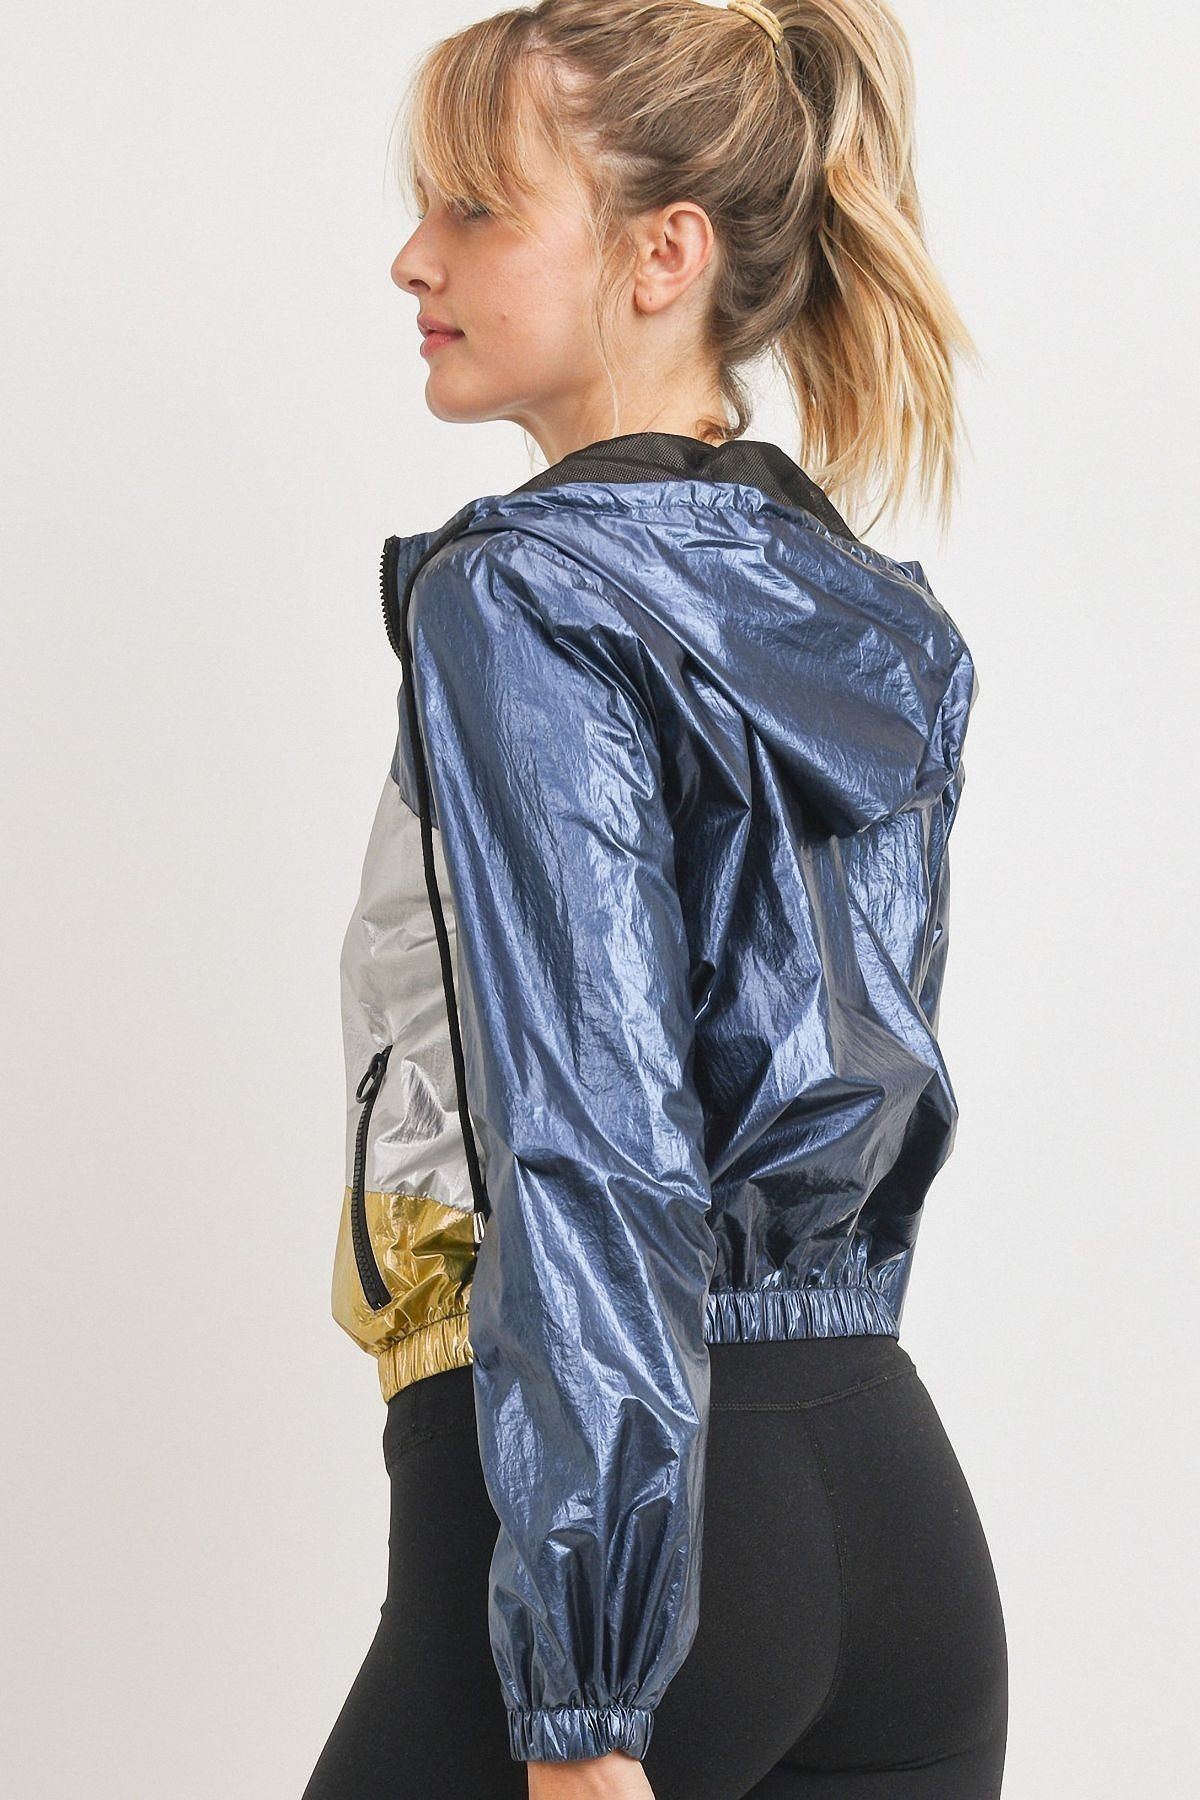 Metallic Colorblock Women's Jacket with Banded Cuff